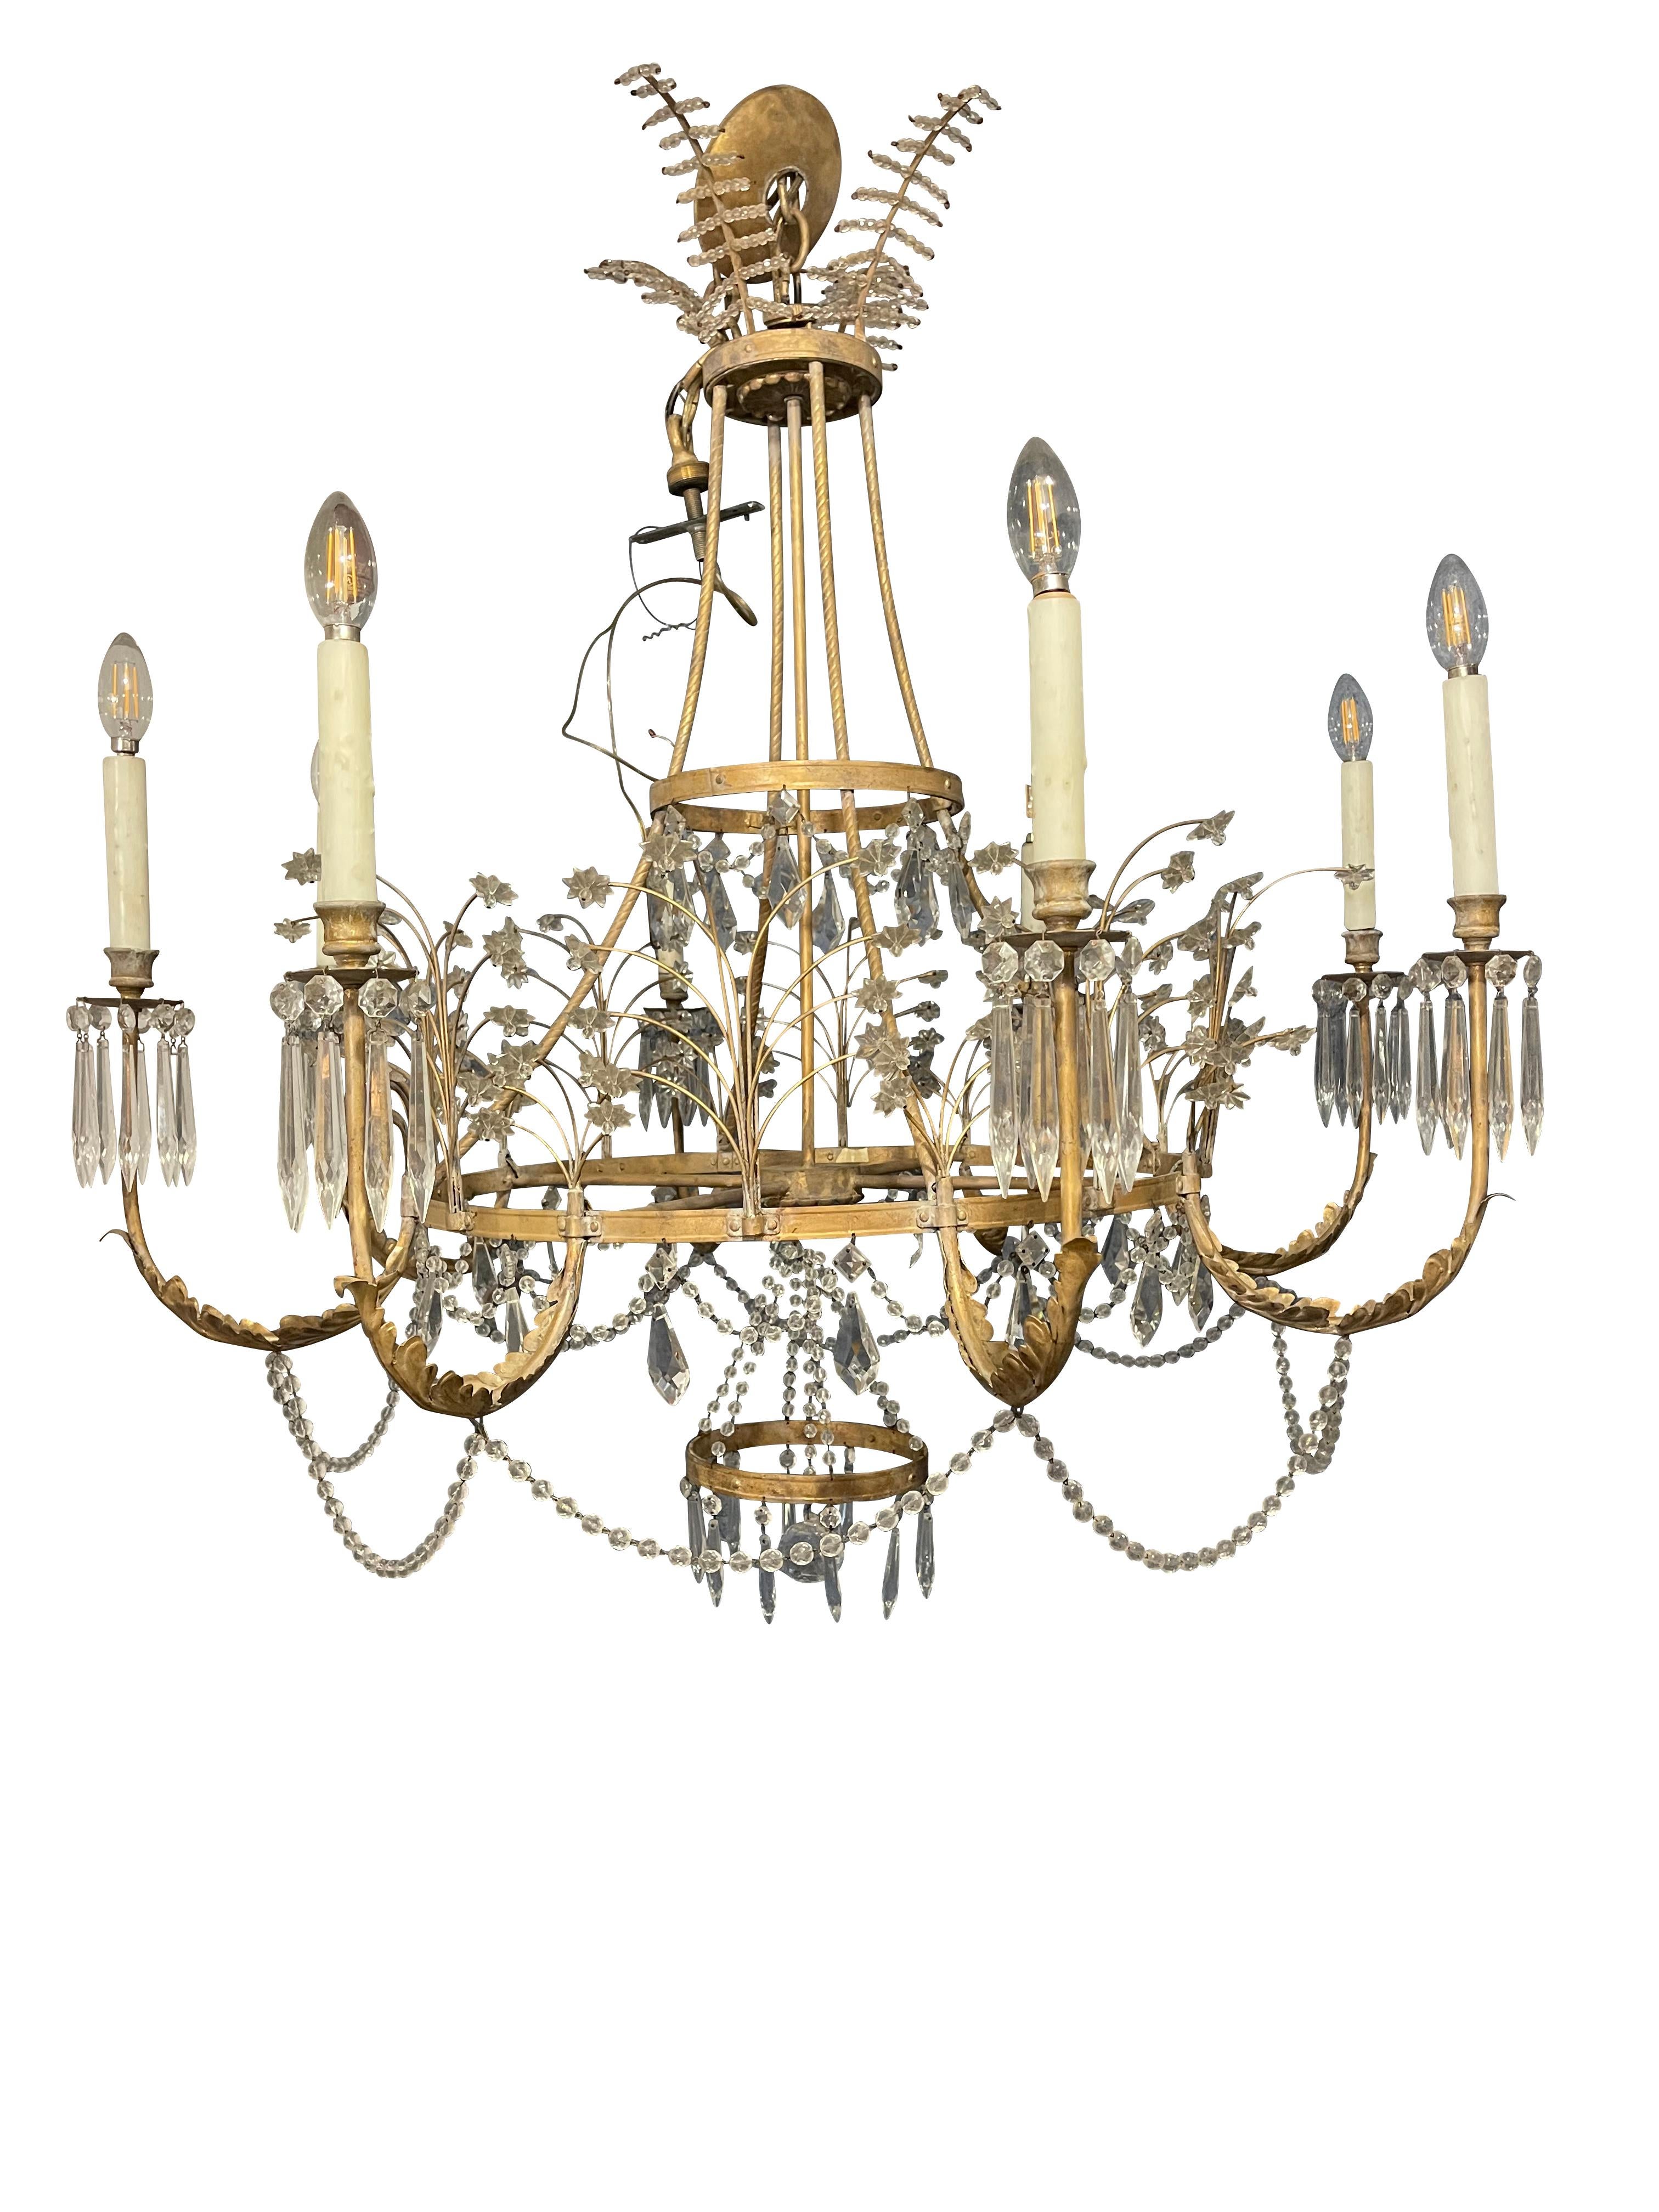 20th Century Swedish/ Russian style chandelier
A beautifully designed, circa 1960 eight-arm chandelier dripping in cut crystal. The gilt bronze carriage features delicate tendrils that spring outward to arching, crystal, frond style embellishments.